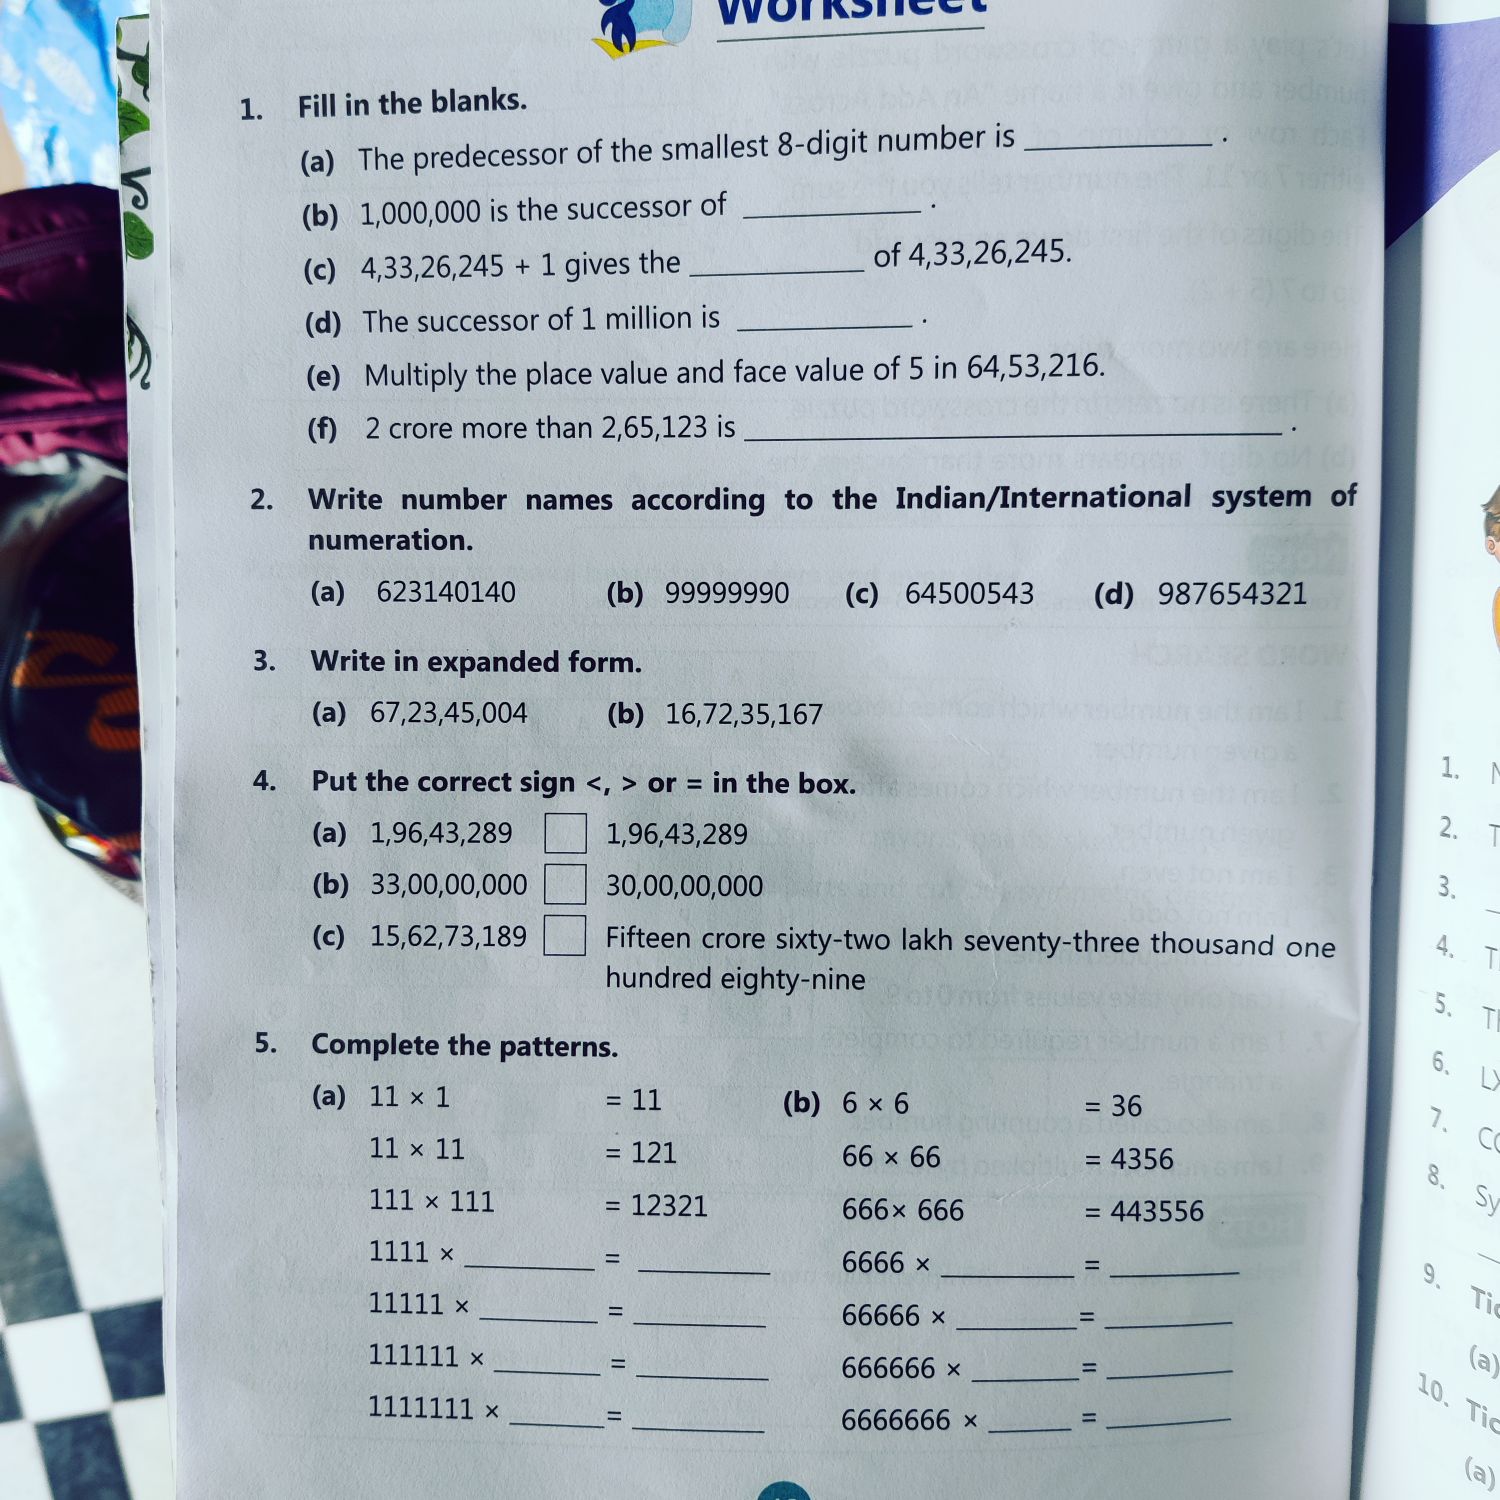 class-9-math-worksheets-and-problems-number-system-edugain-india